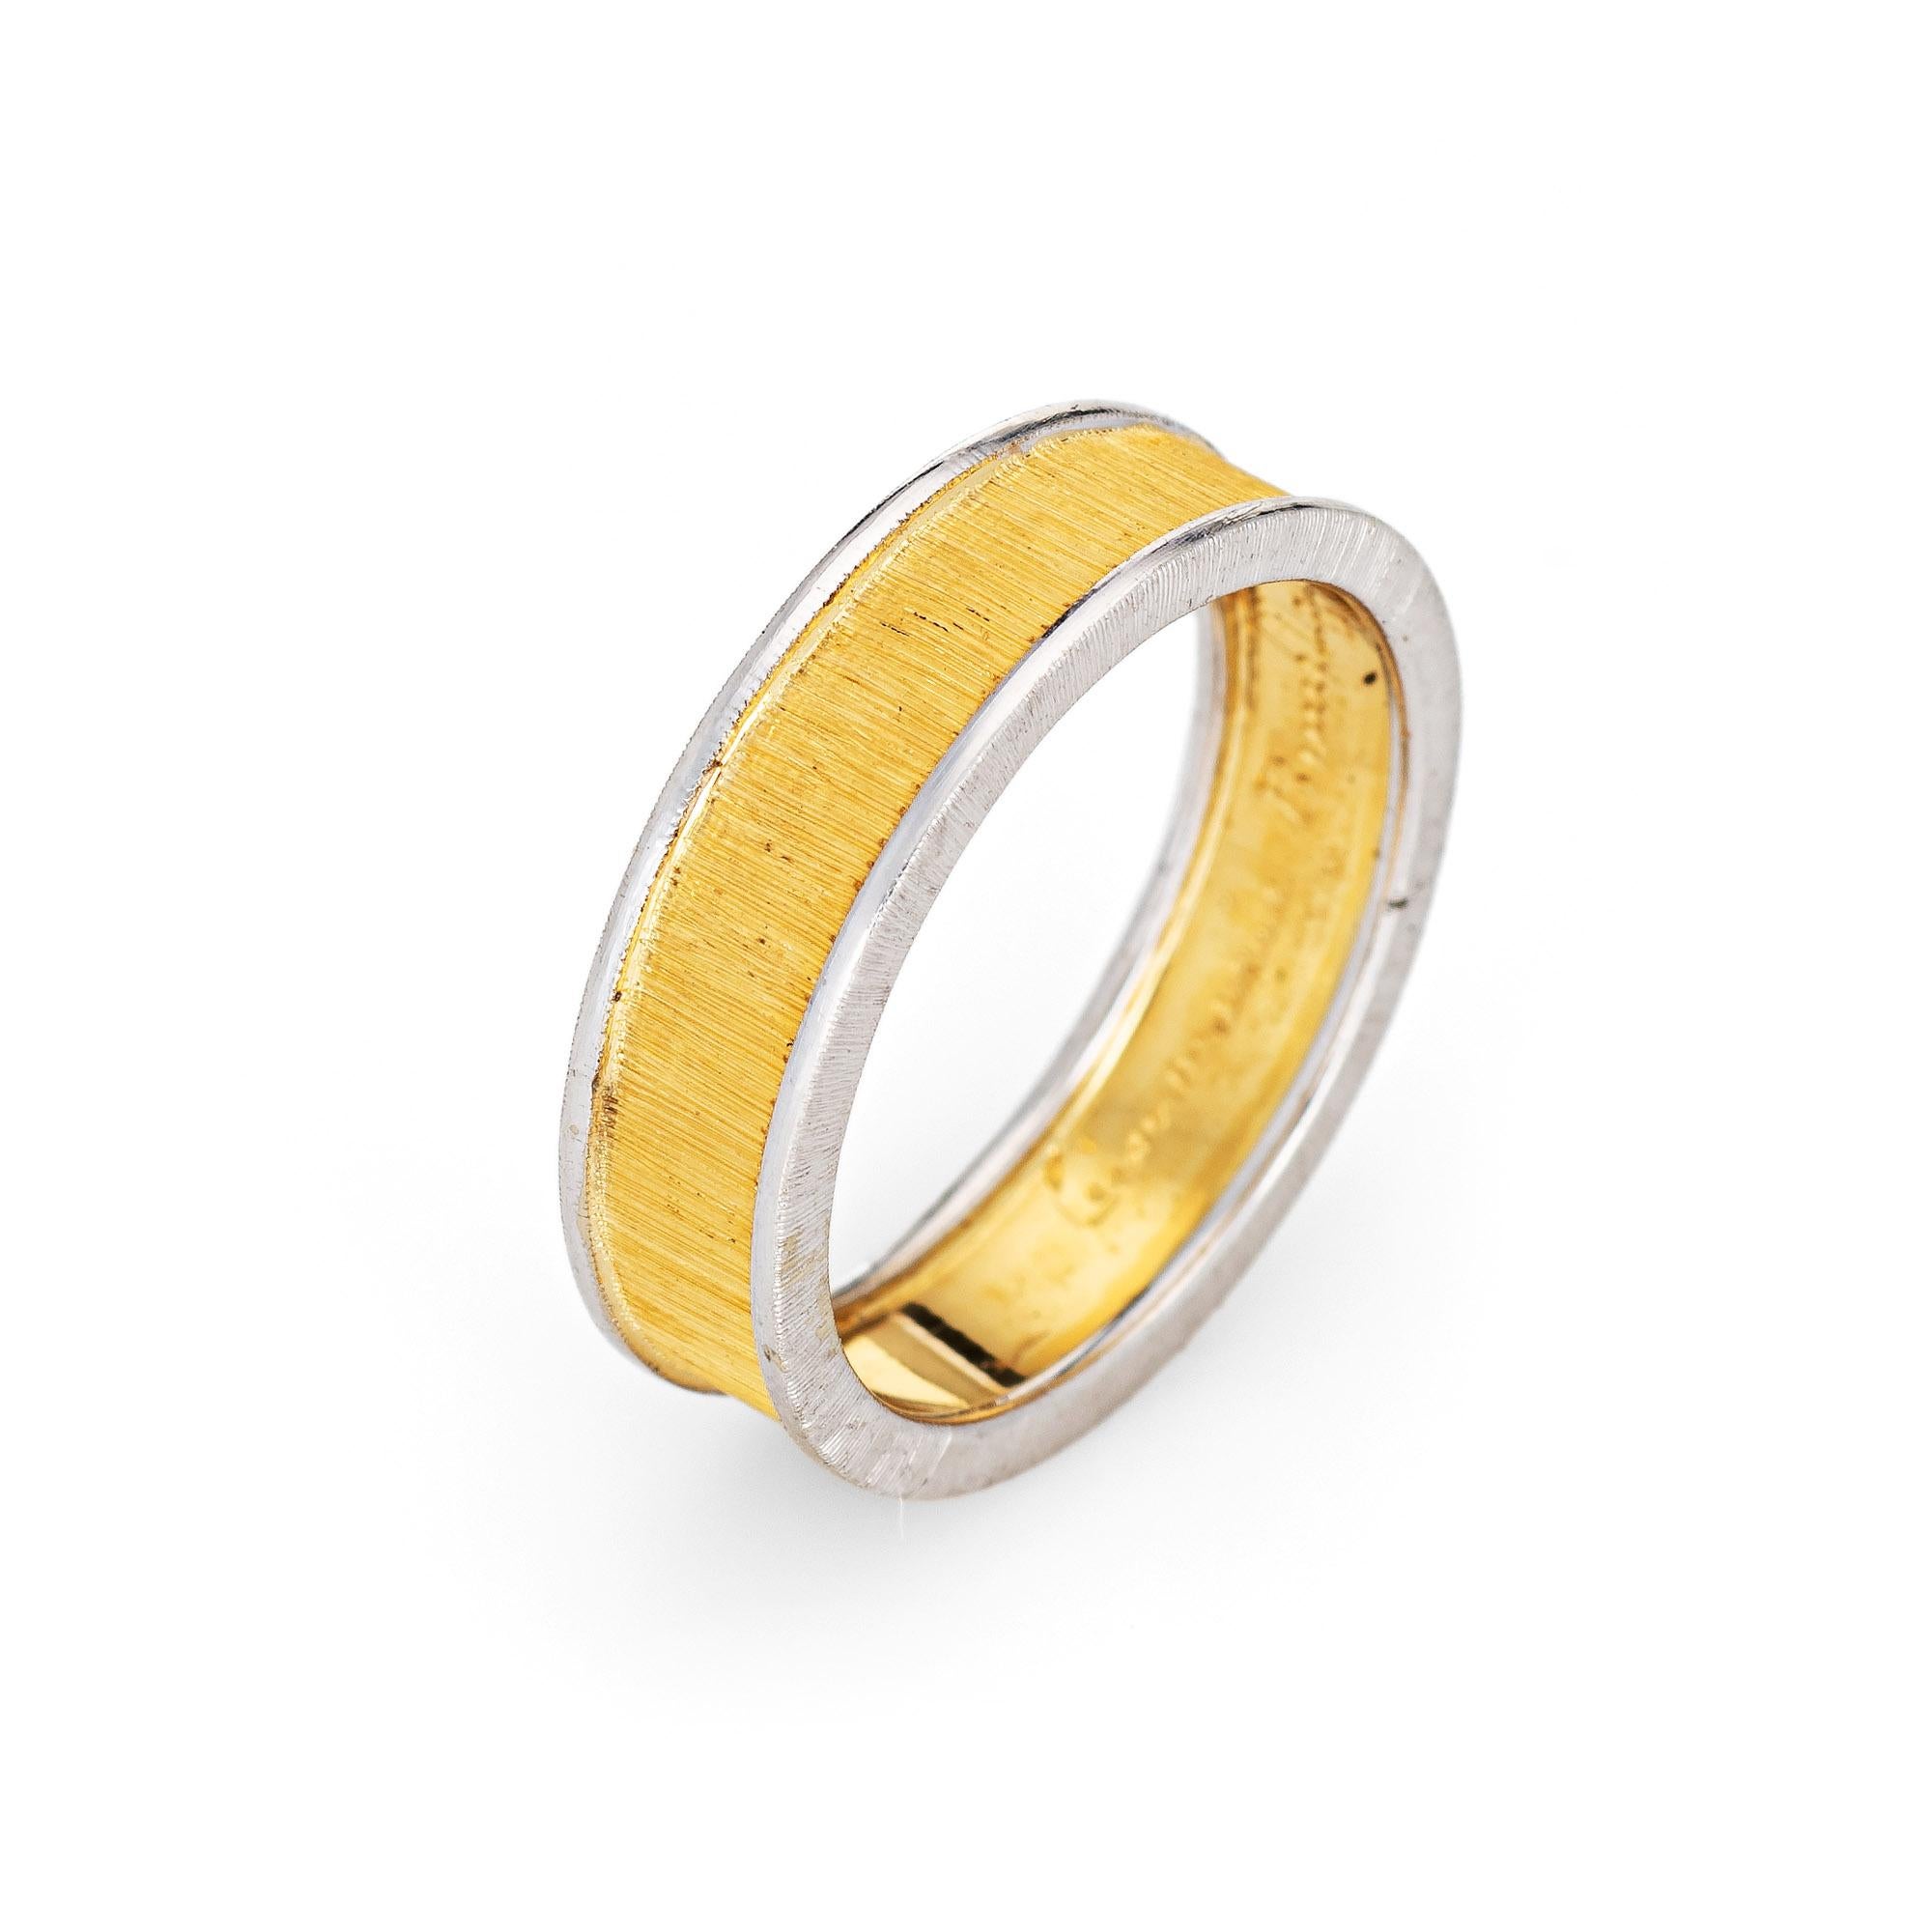 Estate Gianmaria Buccellati band crafted in 18k yellow & white gold (circa 1990s).  

The band features hand engraved textured gold detail to the yellow gold portion of the band, a distinct hallmark of Buccellati jewelry, with white gold detail